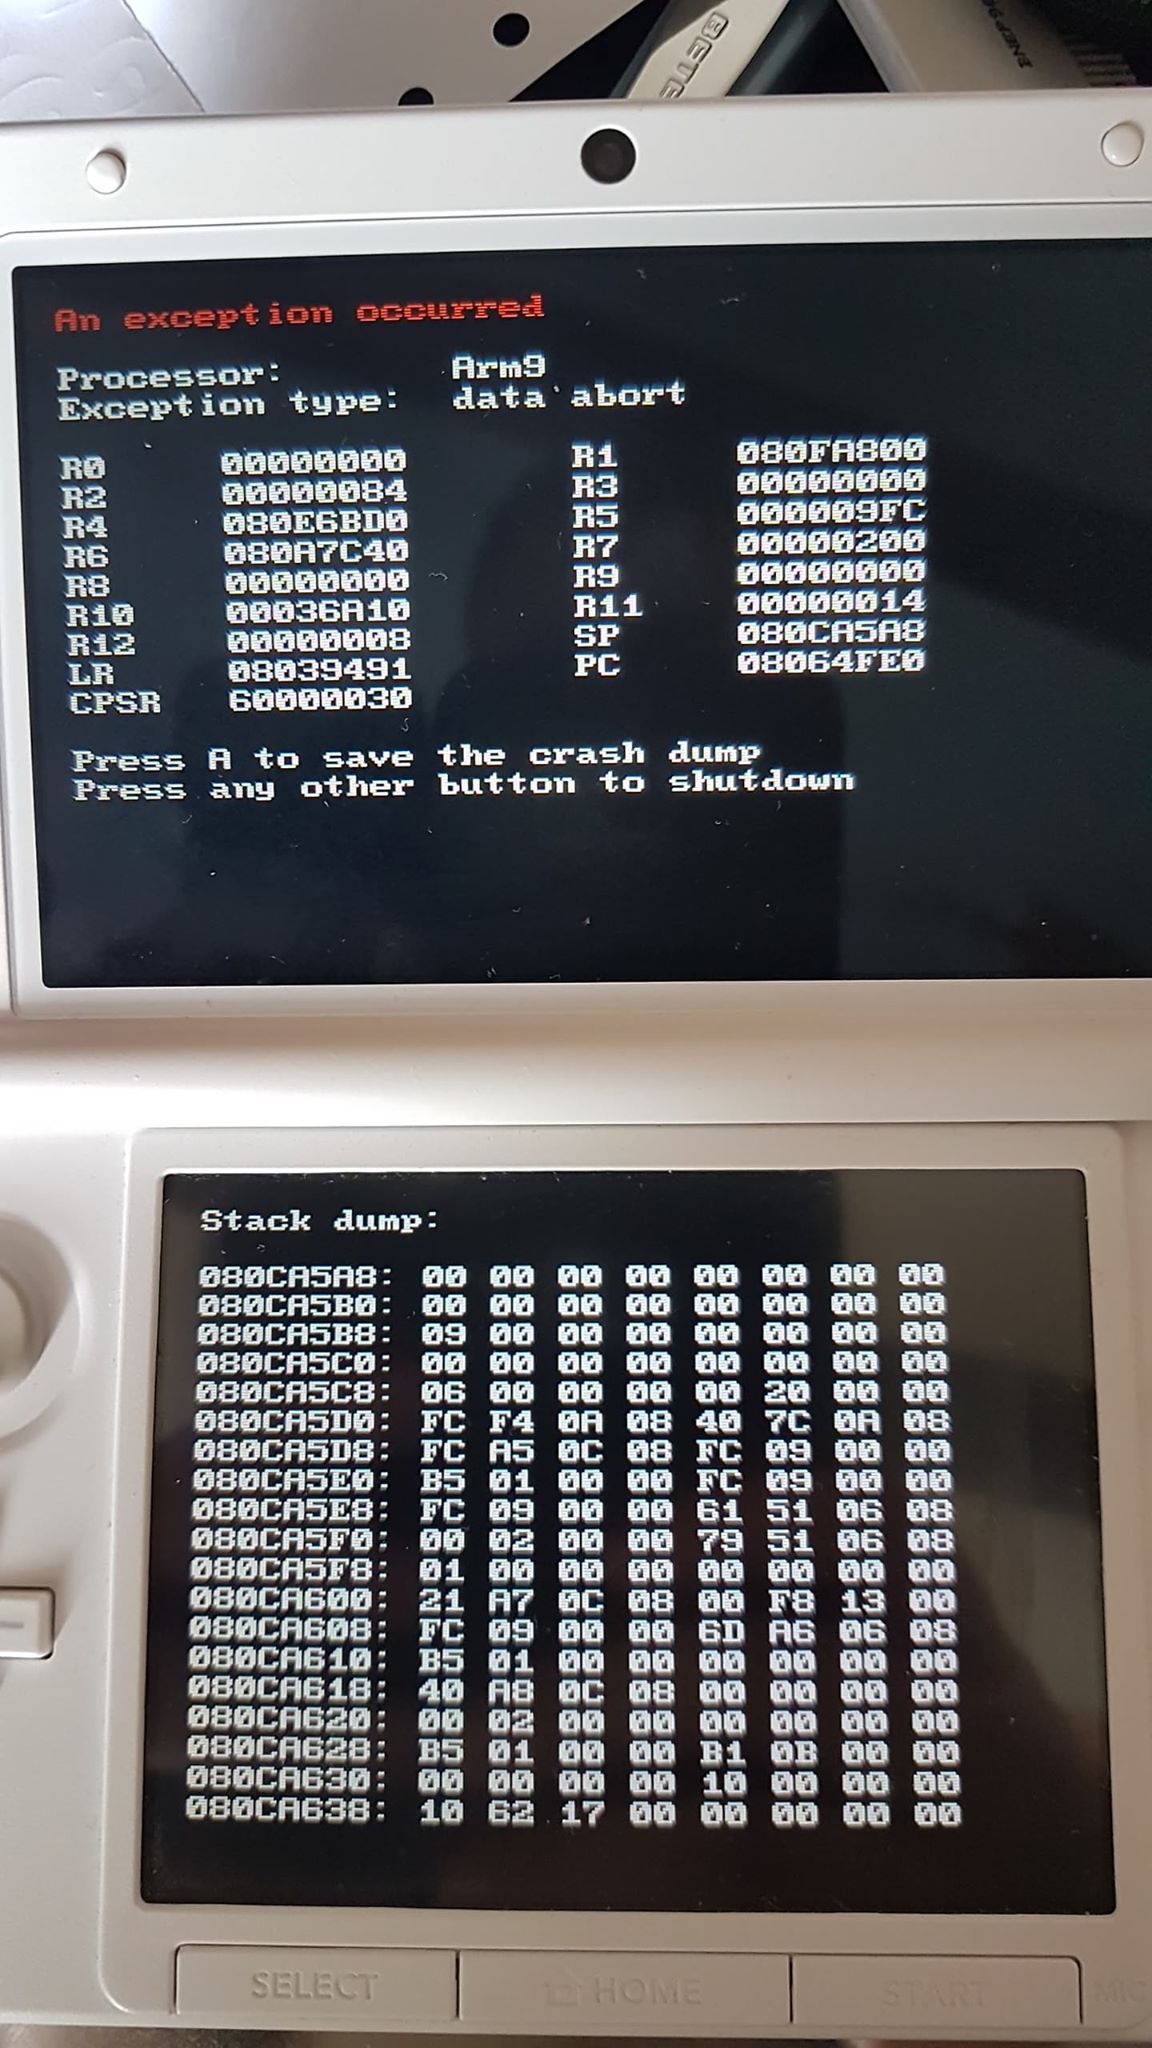 old3ds - Arm9 / Data Abort | GBAtemp.net - The Independent Video Game  Community